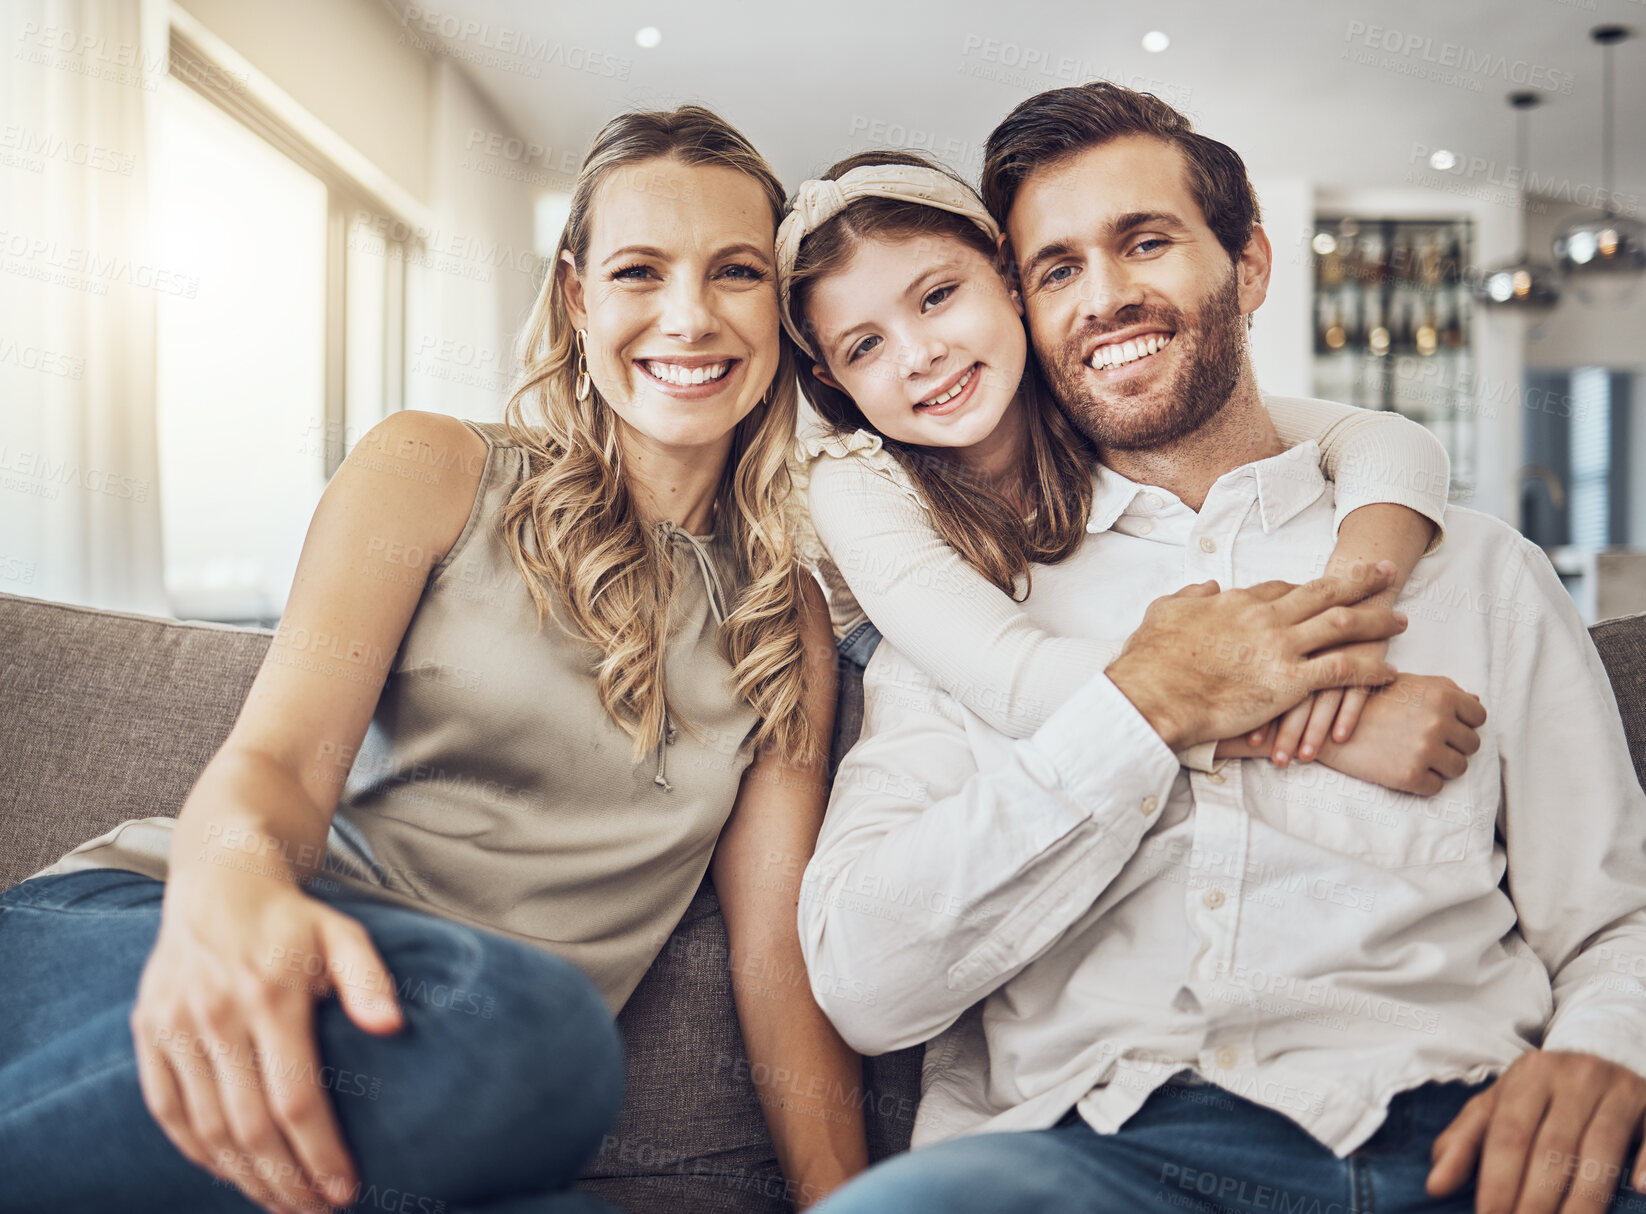 Buy stock photo Portrait, mother or father hugging a girl to relax as a happy family in living room bonding in Australia with love or care. Trust, embrace or parents smile with kid enjoying quality time on a holiday